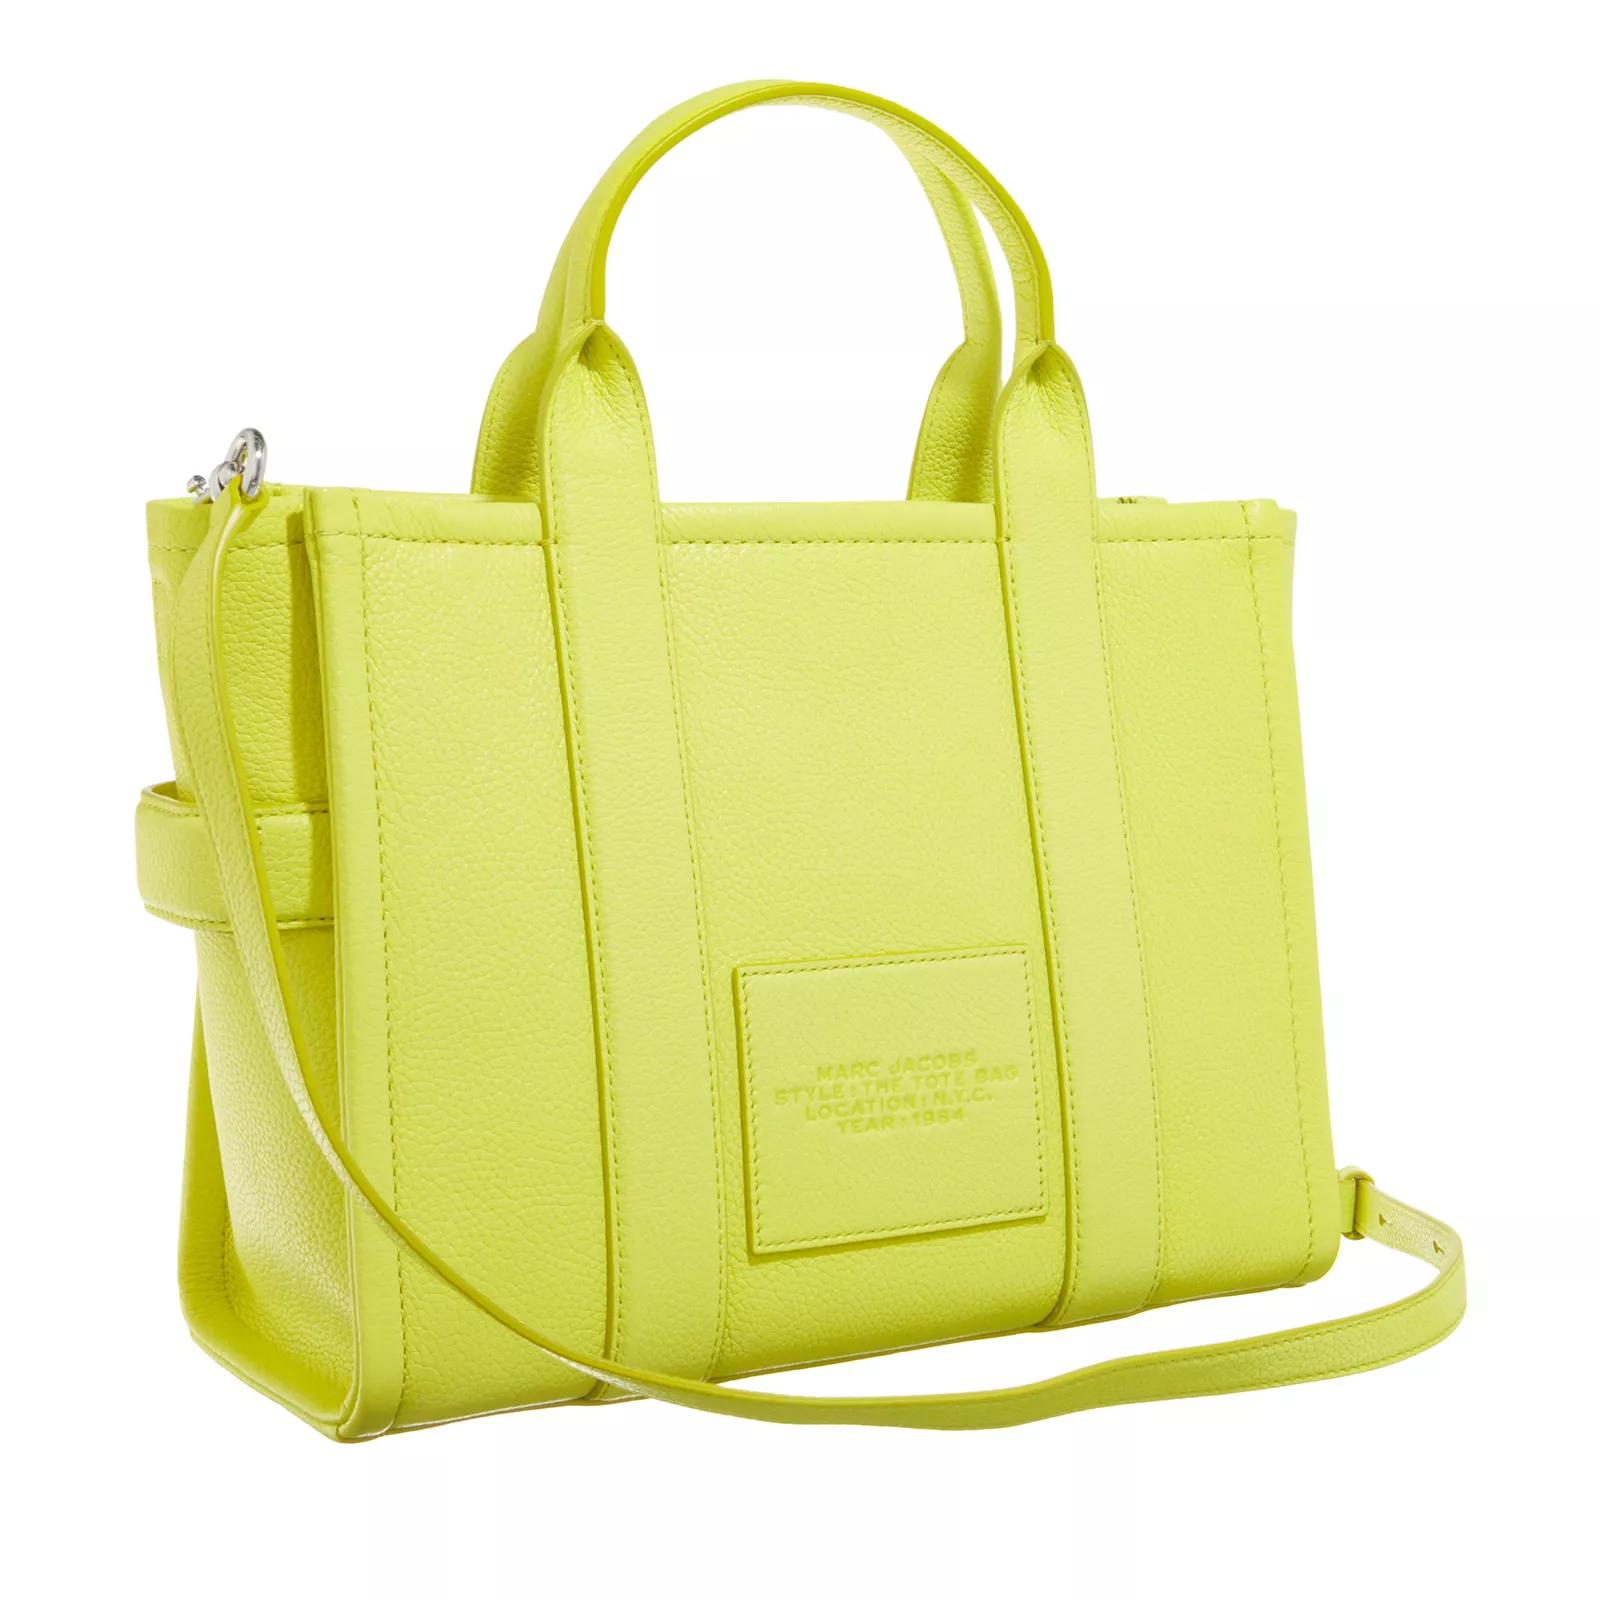 Marc Jacobs Totes The Medium Tote in geel